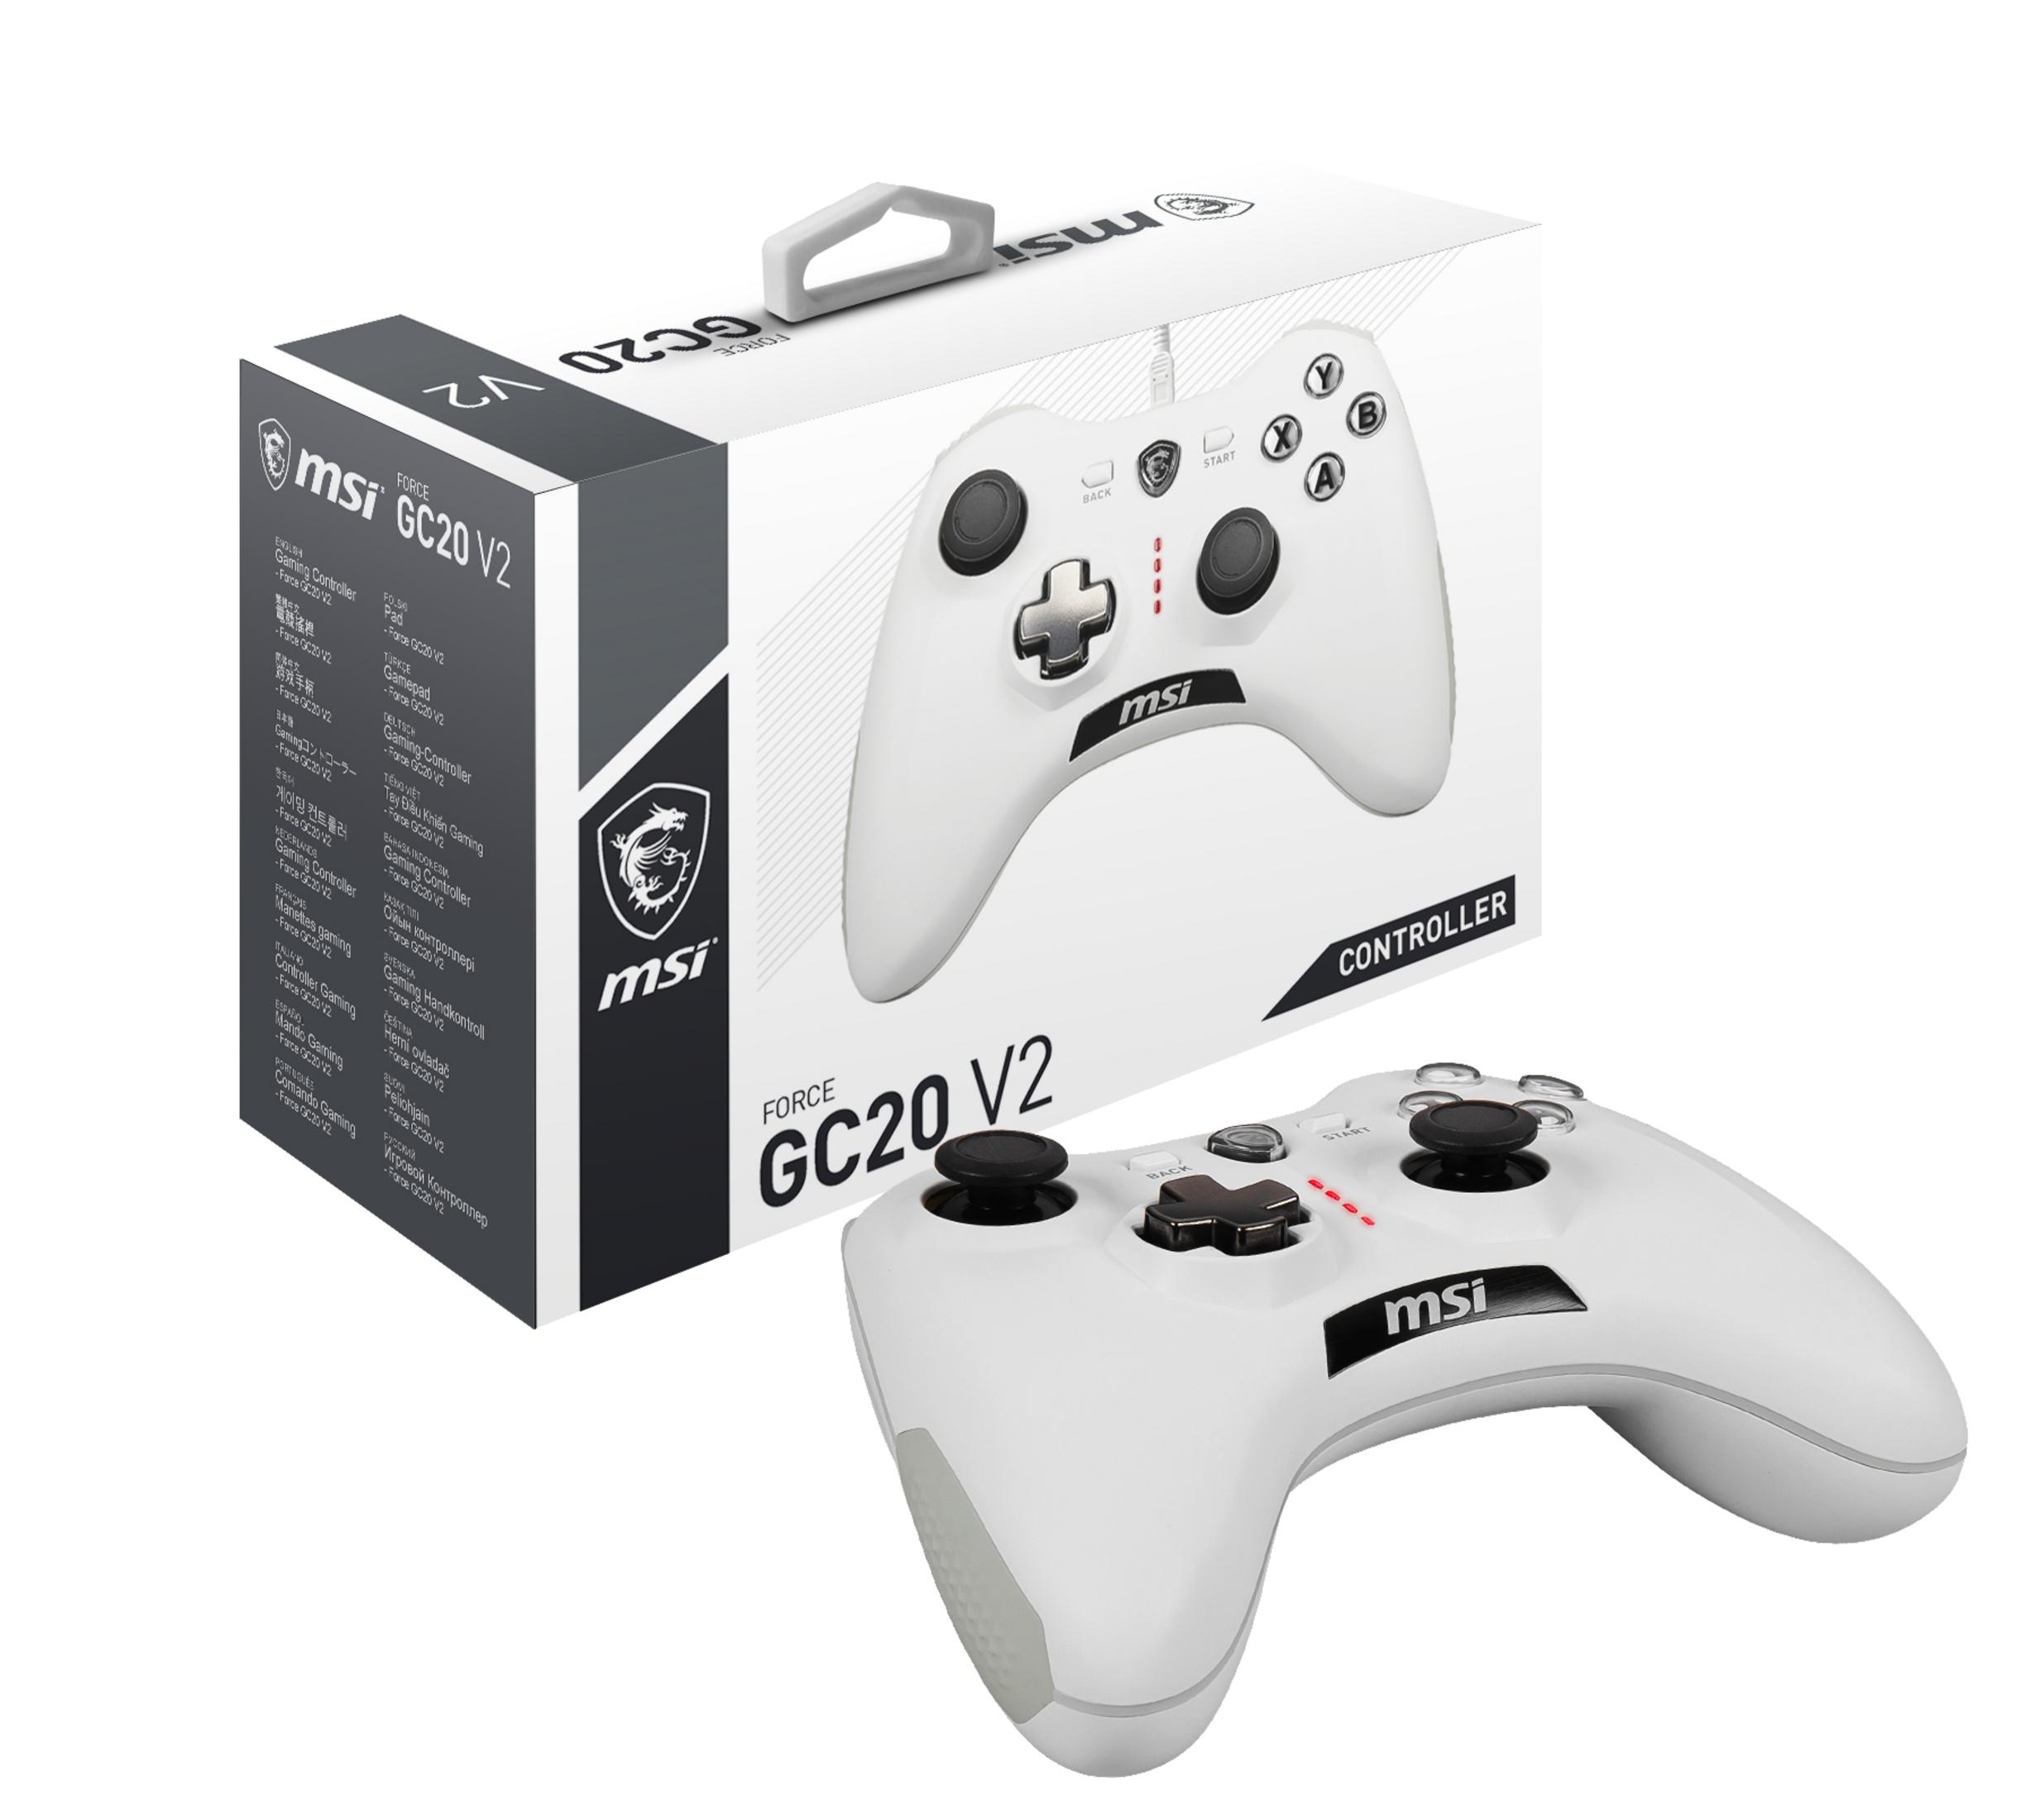 Weiß Game Controller FORCE CONTROLLER S10-04G0020-EC4 MSI GC20 V2 GAME